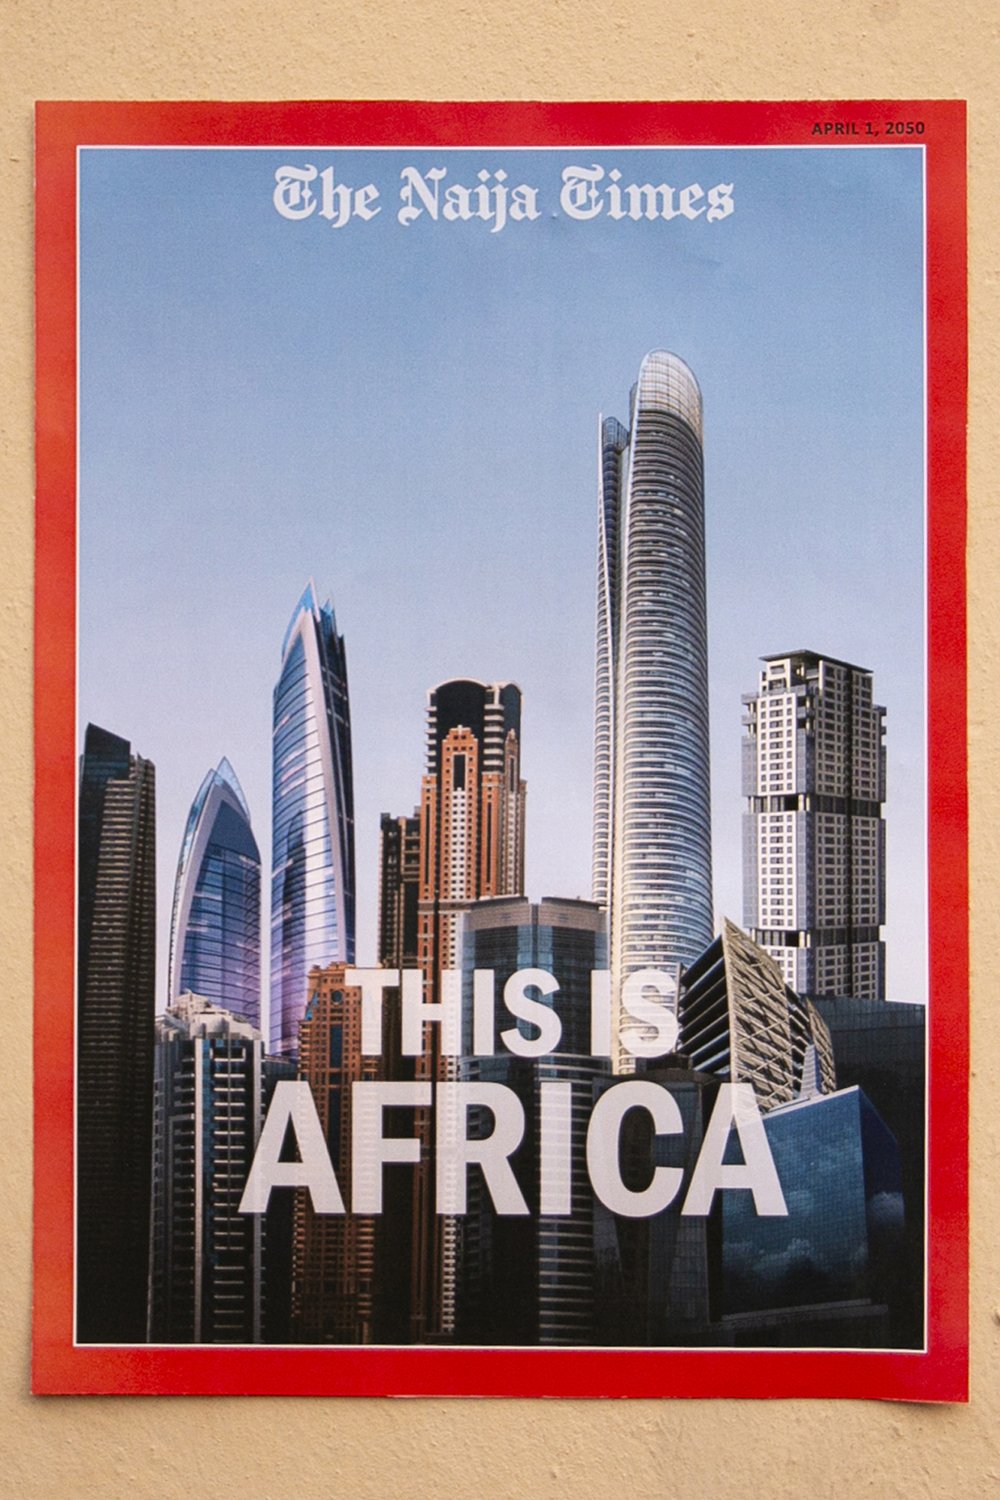  This is Africa 